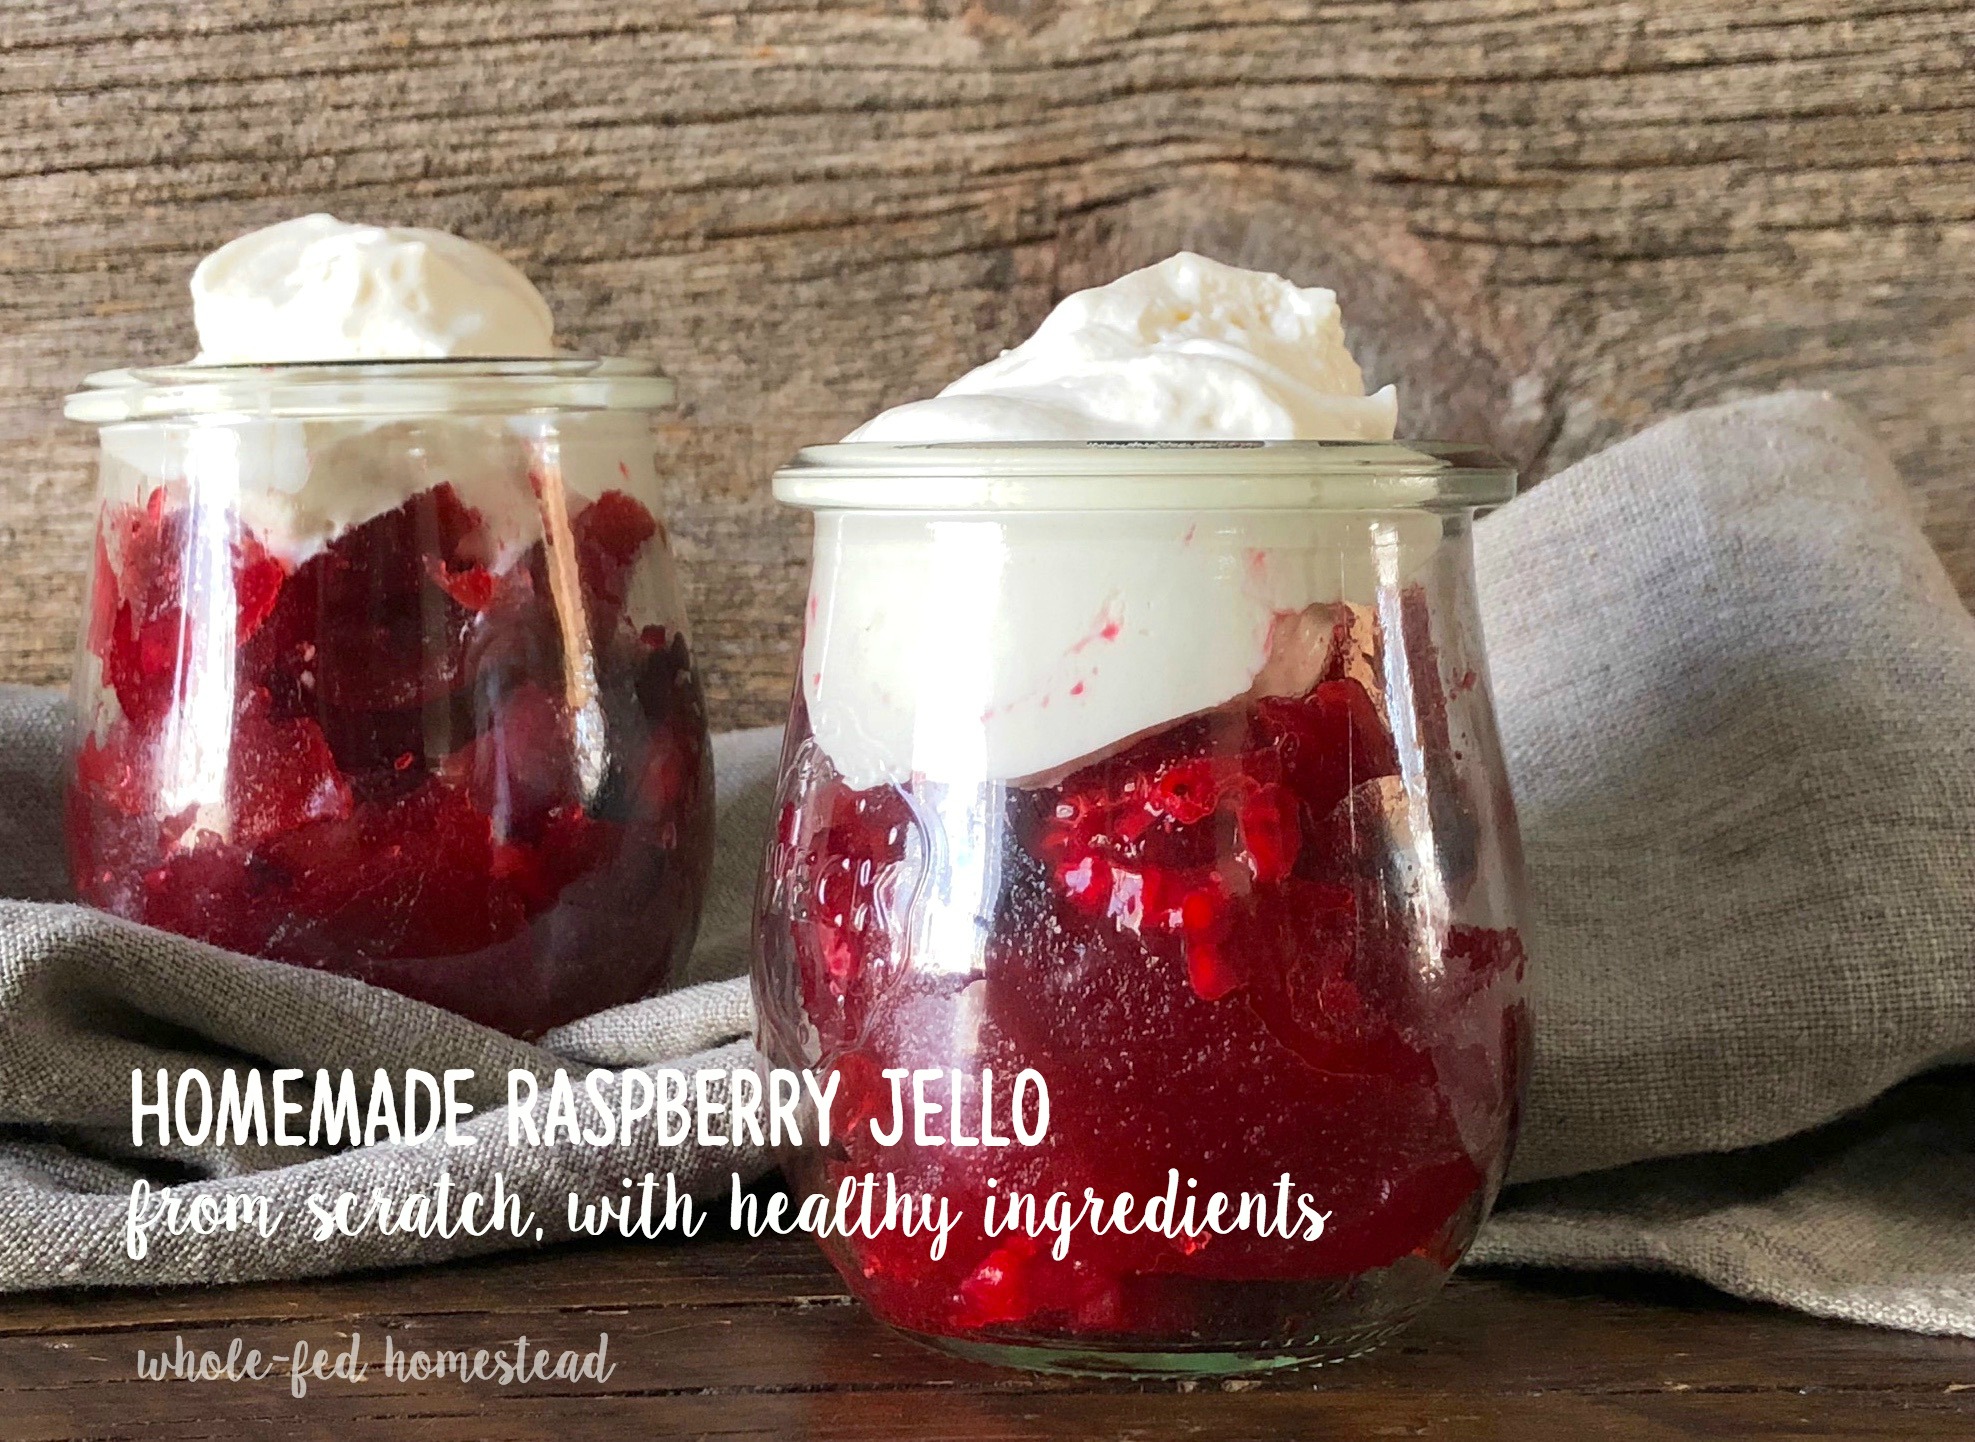 Homemade Raspberry Jello Recipe {From Scratch with Real, Healthy Ingredients}